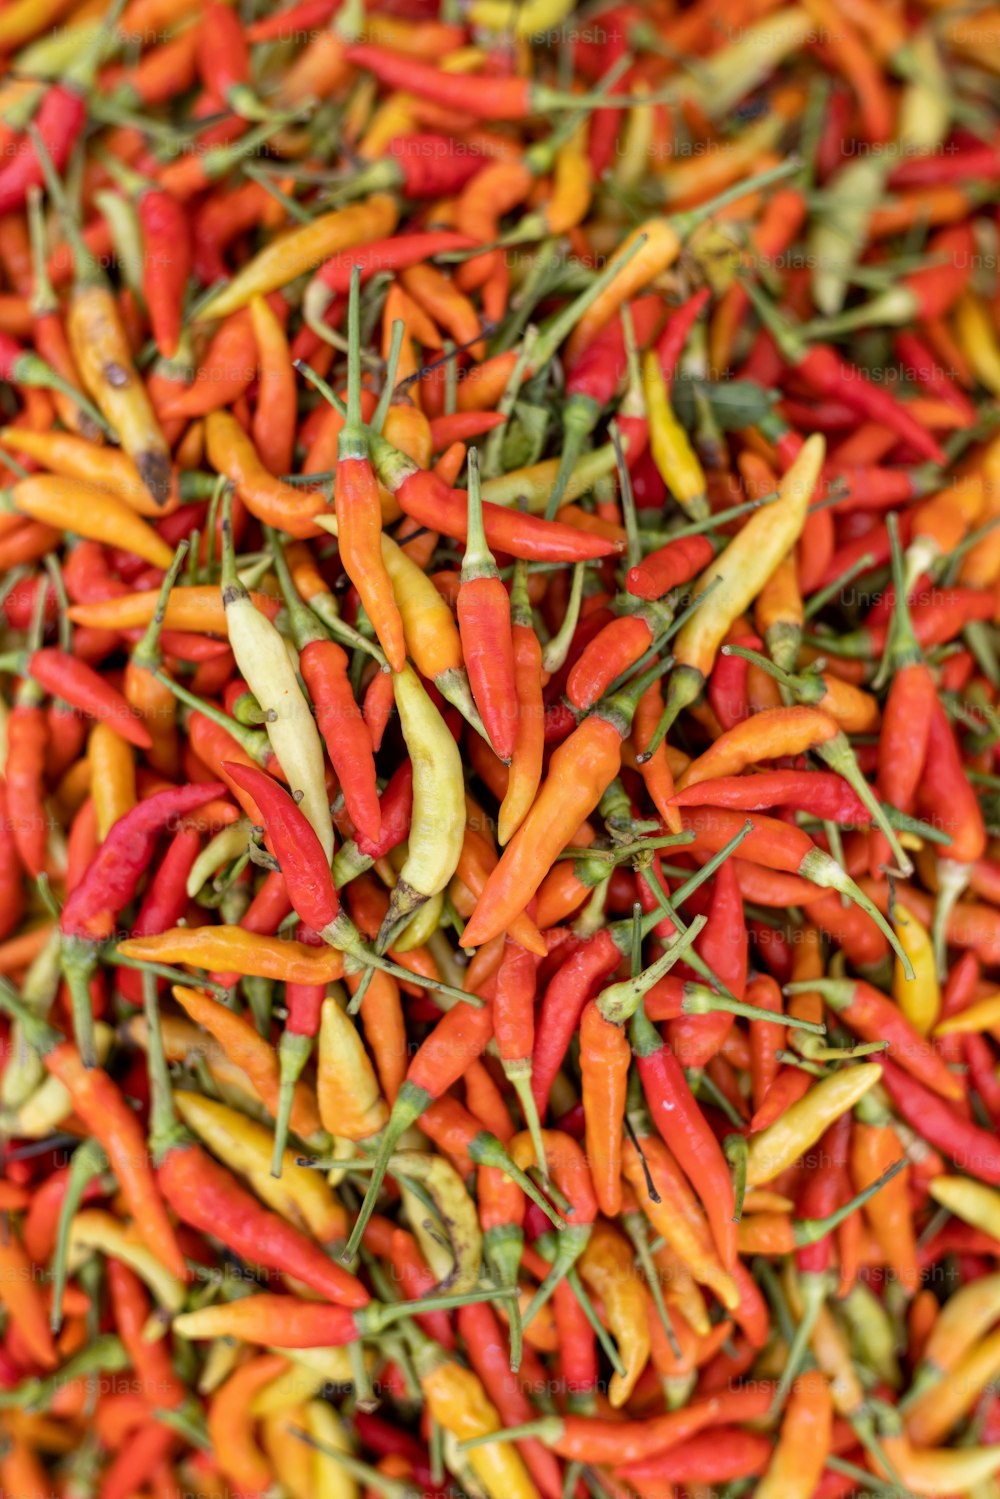 a large pile of red and yellow peppers